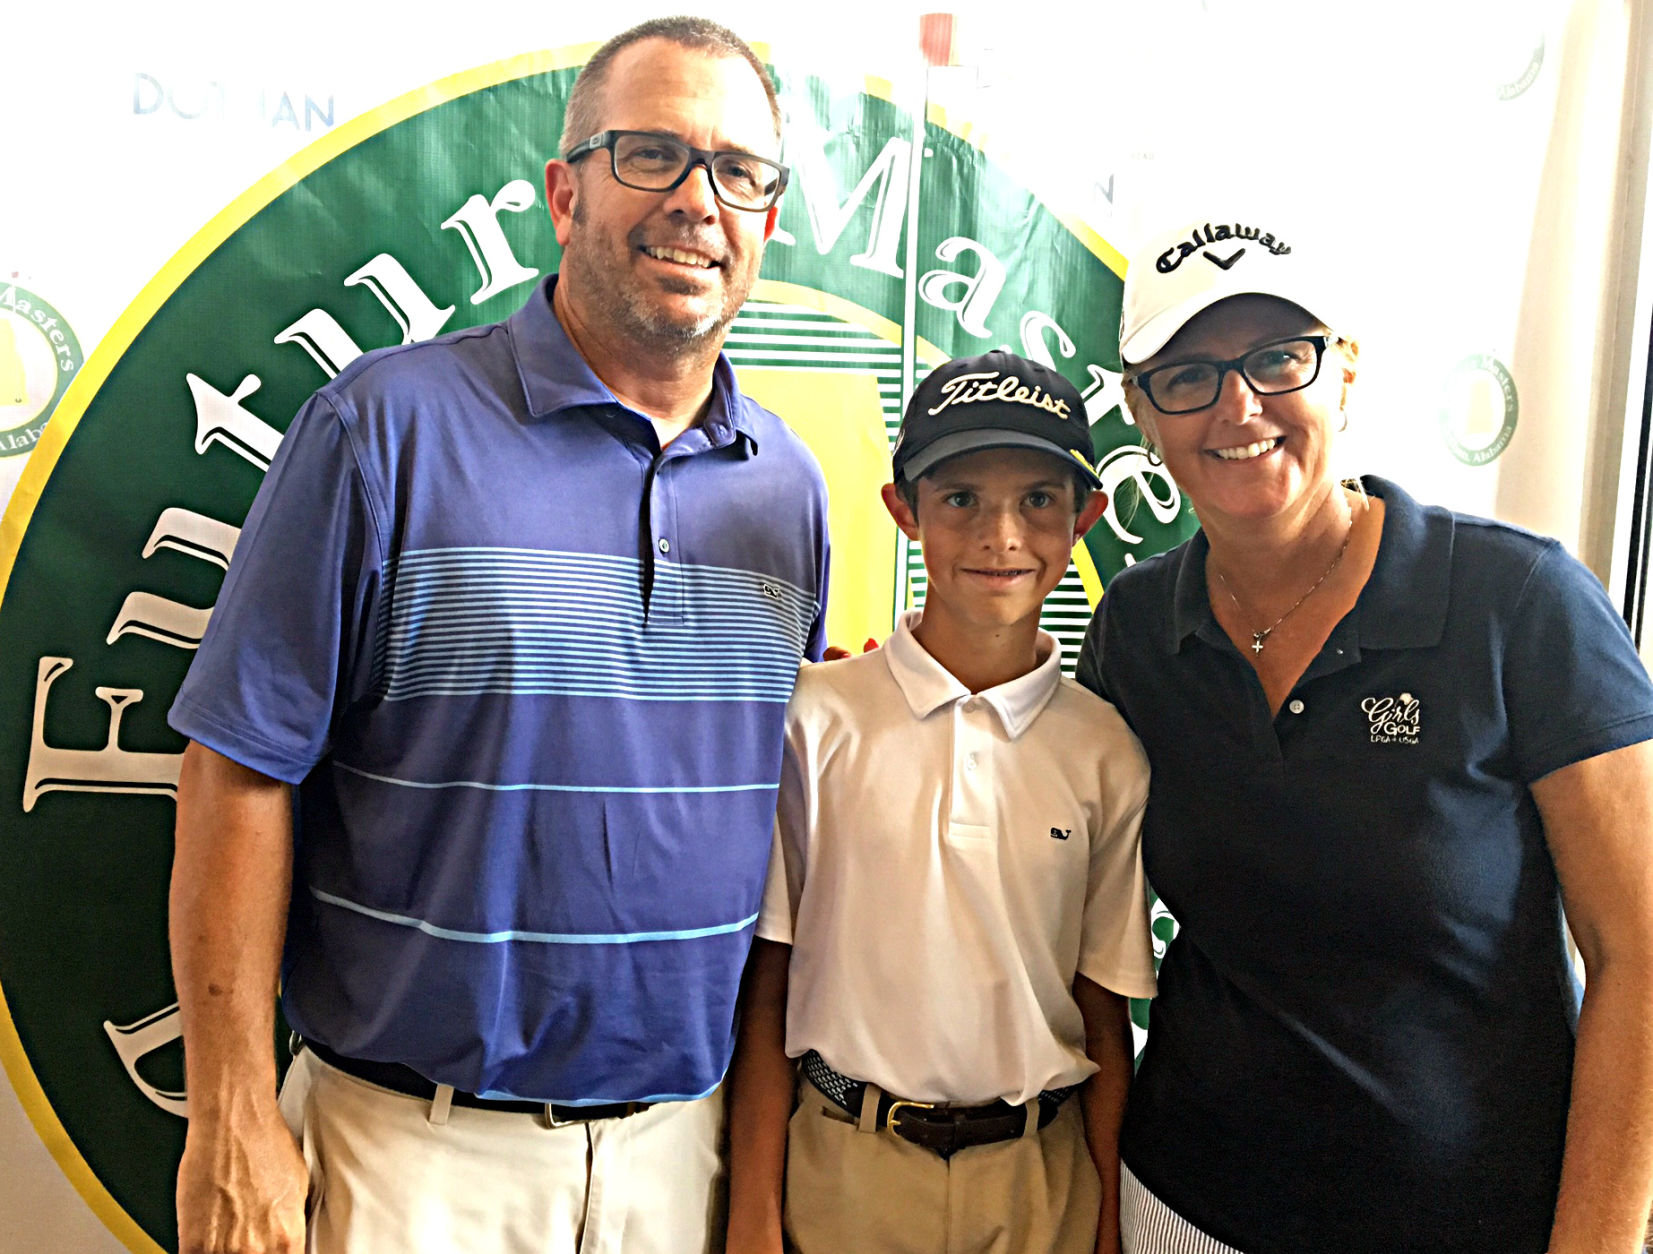 LPGA veteran and player president Vicki Goetze-Ackerman in town to watch son play in Future Masters